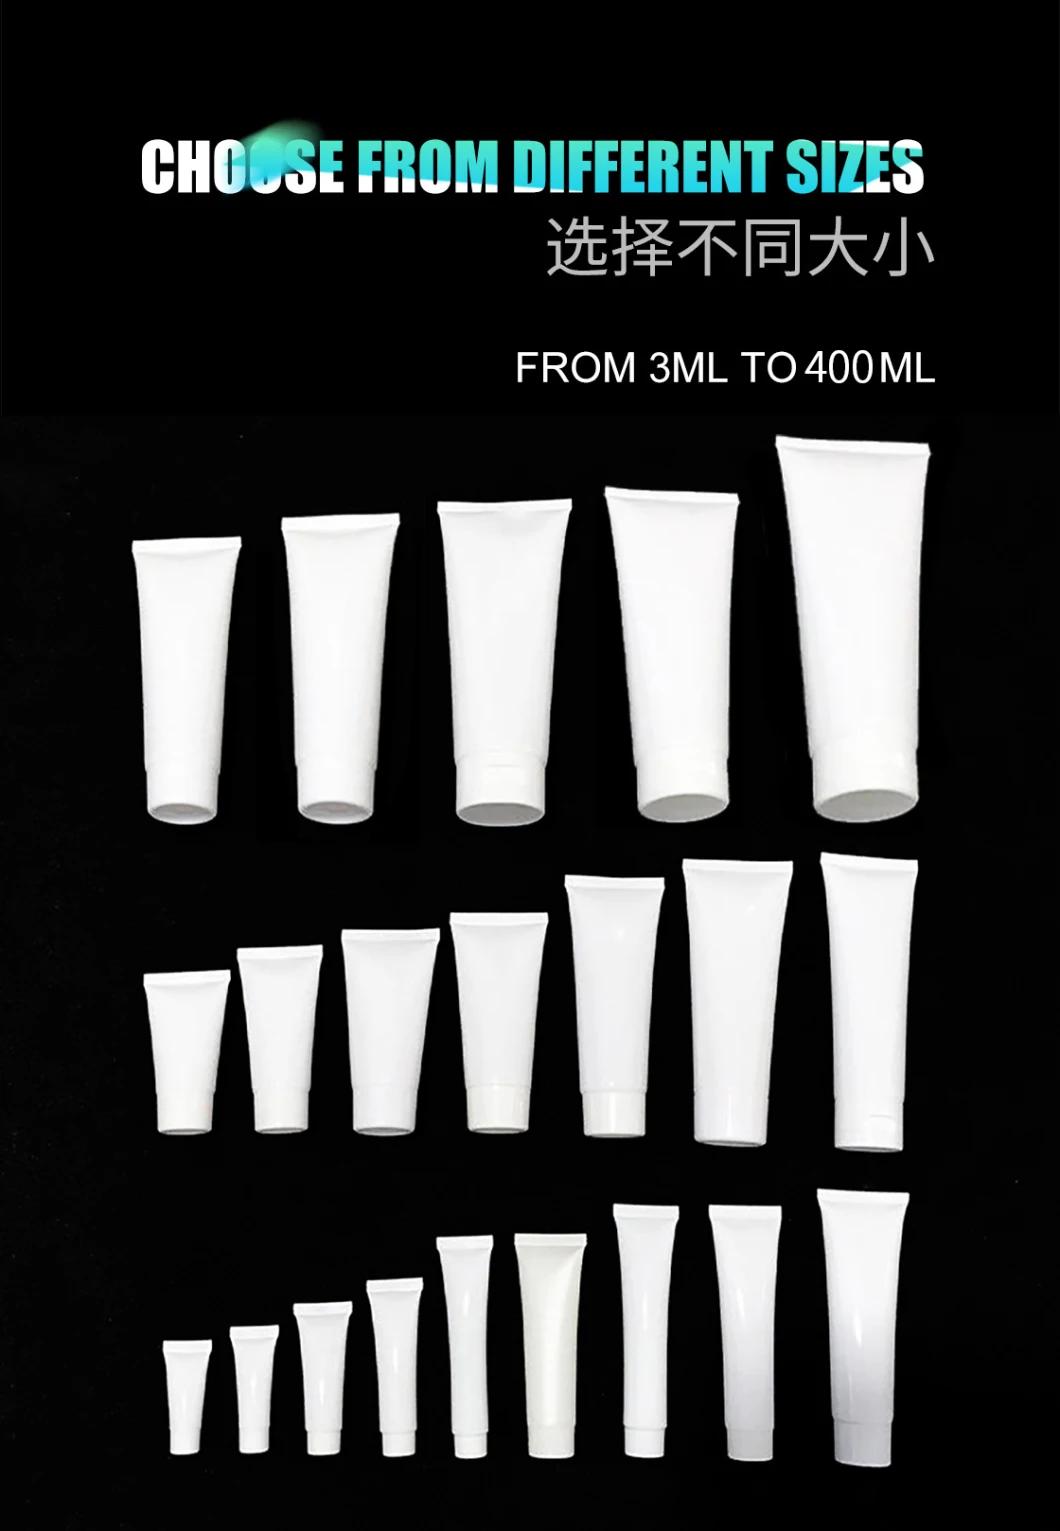 Cosmetics Plastic Tube Hand Lotion Face Cream Sunscreen Traveling Packing Shampoo White Soft Squeezetube